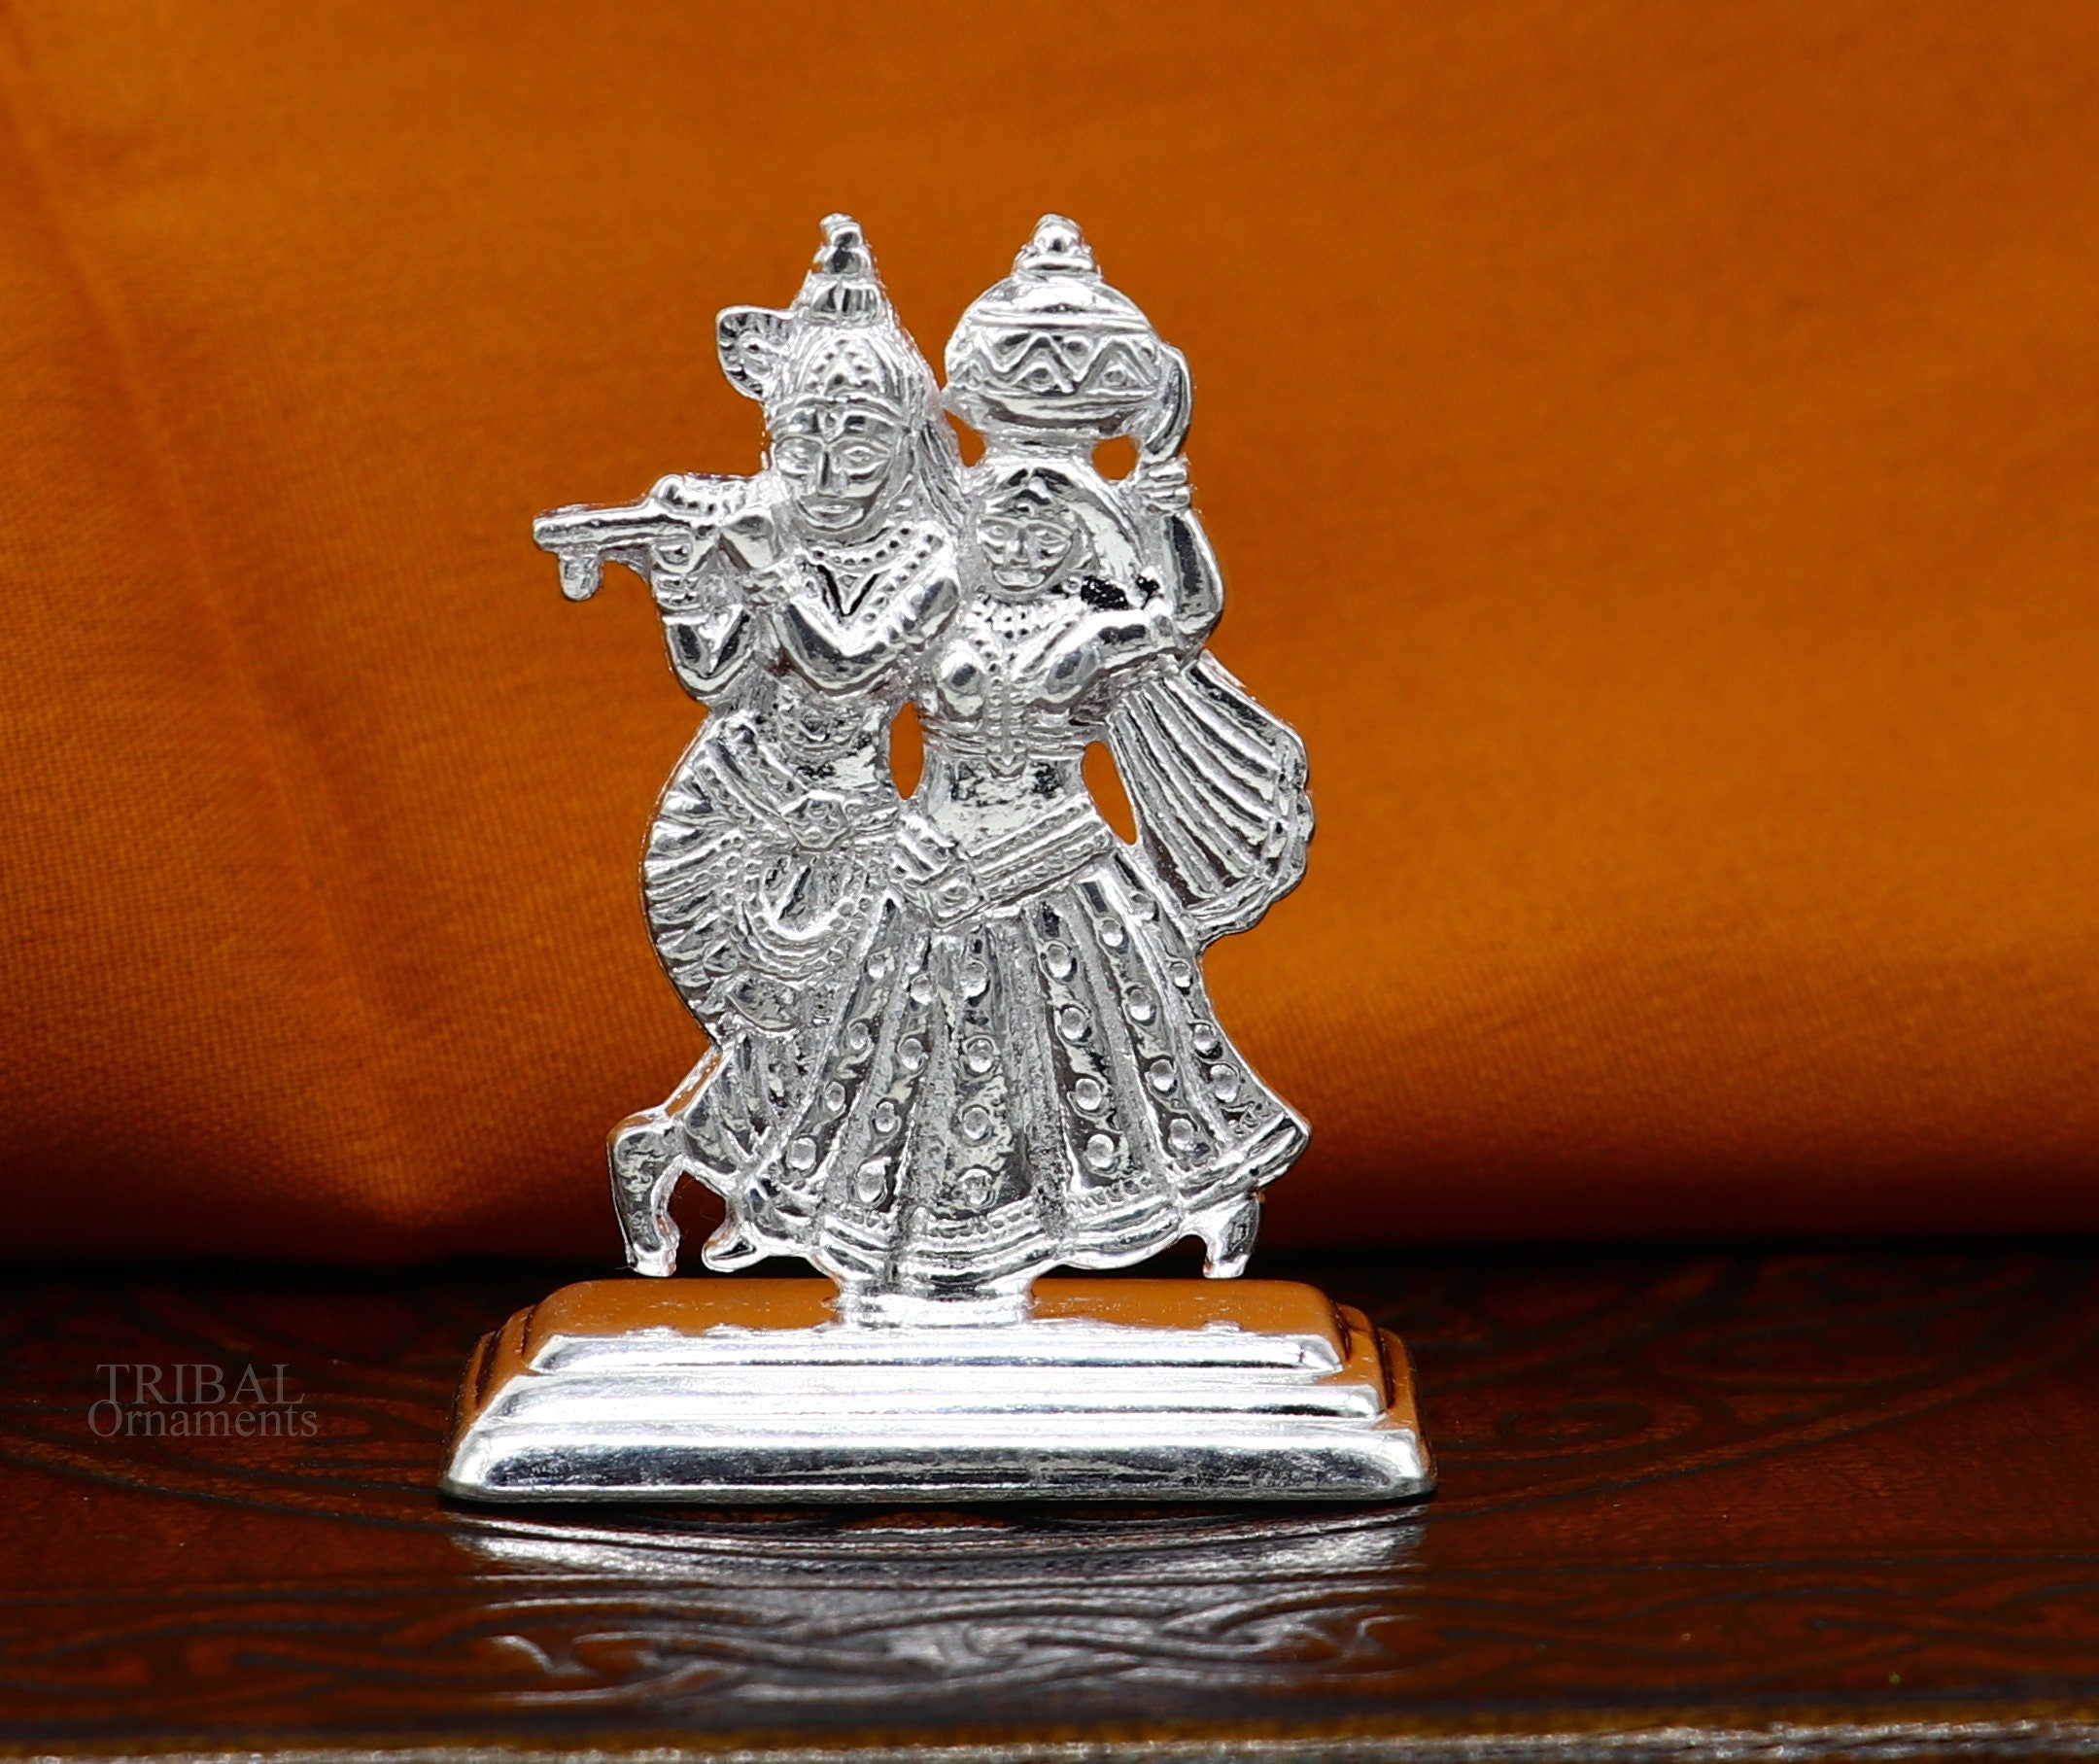 Buy AFTERSTITCH Radha Krishna Idol Murti Showpiece Statue for Home  Decoration Pooja Room Lord Baal Krishna Idols for Car Dashboard & Gift  Purpose Online at Low Prices in India - Amazon.in